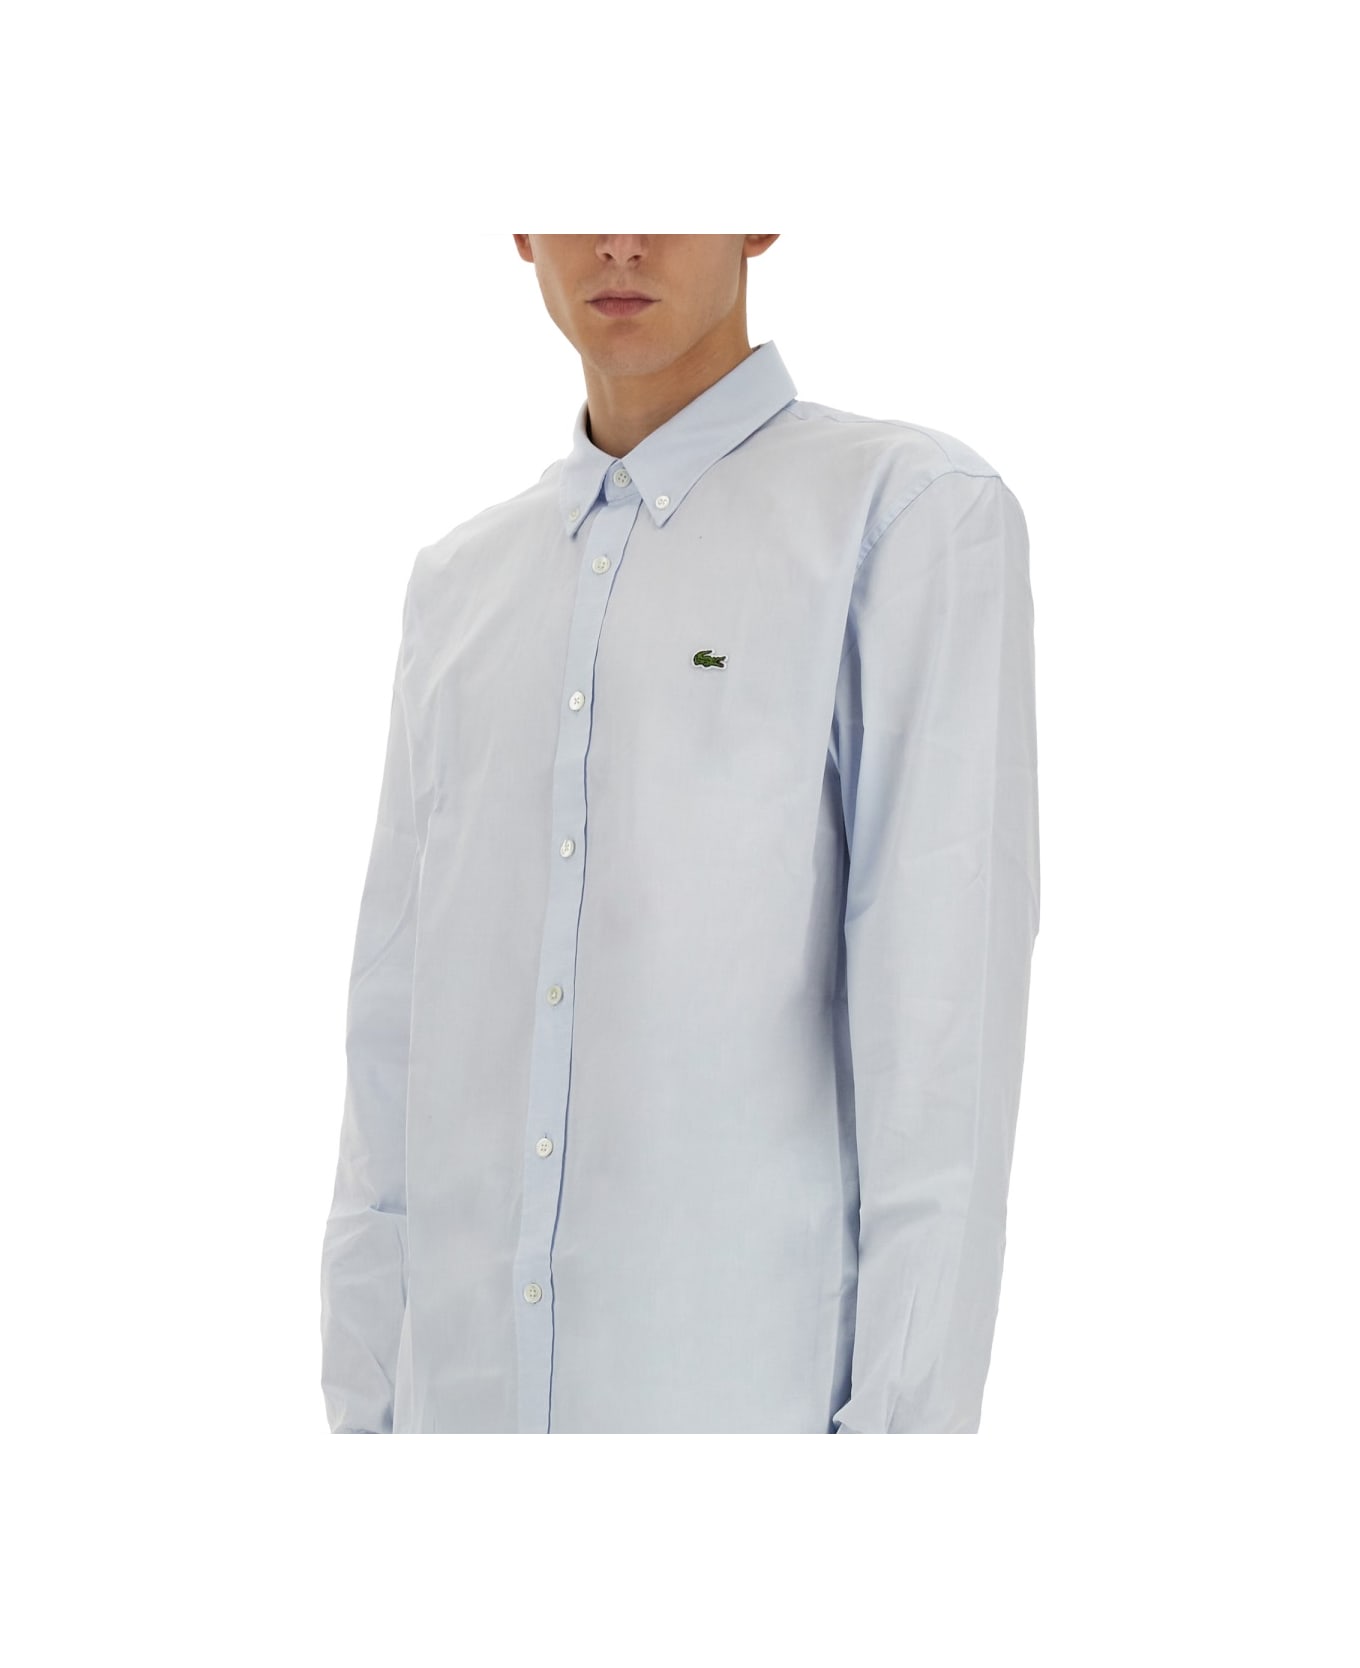 Lacoste Shirt With Logo - BABY BLUE